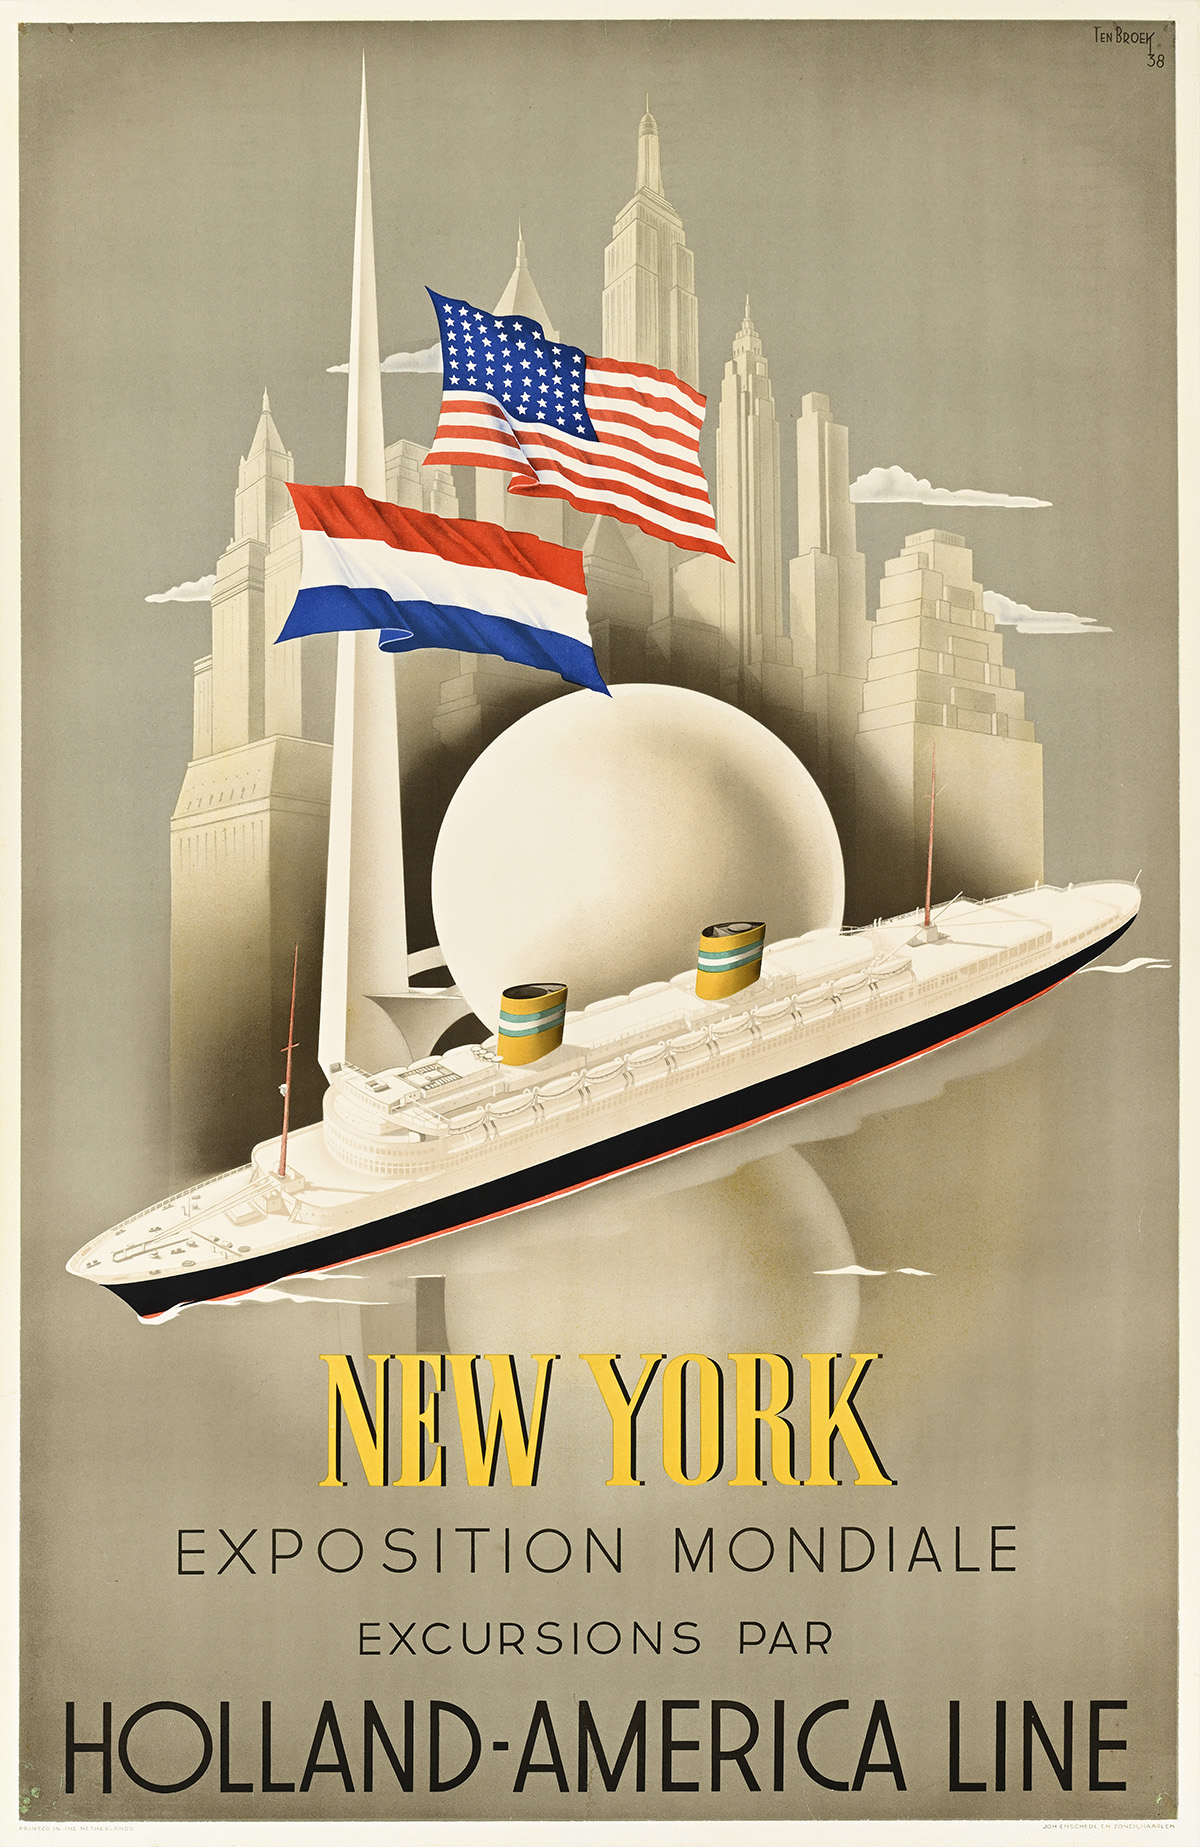 A brown poster of a long skinny ship in front of the New York skyline and the Trylon and Perisphere.